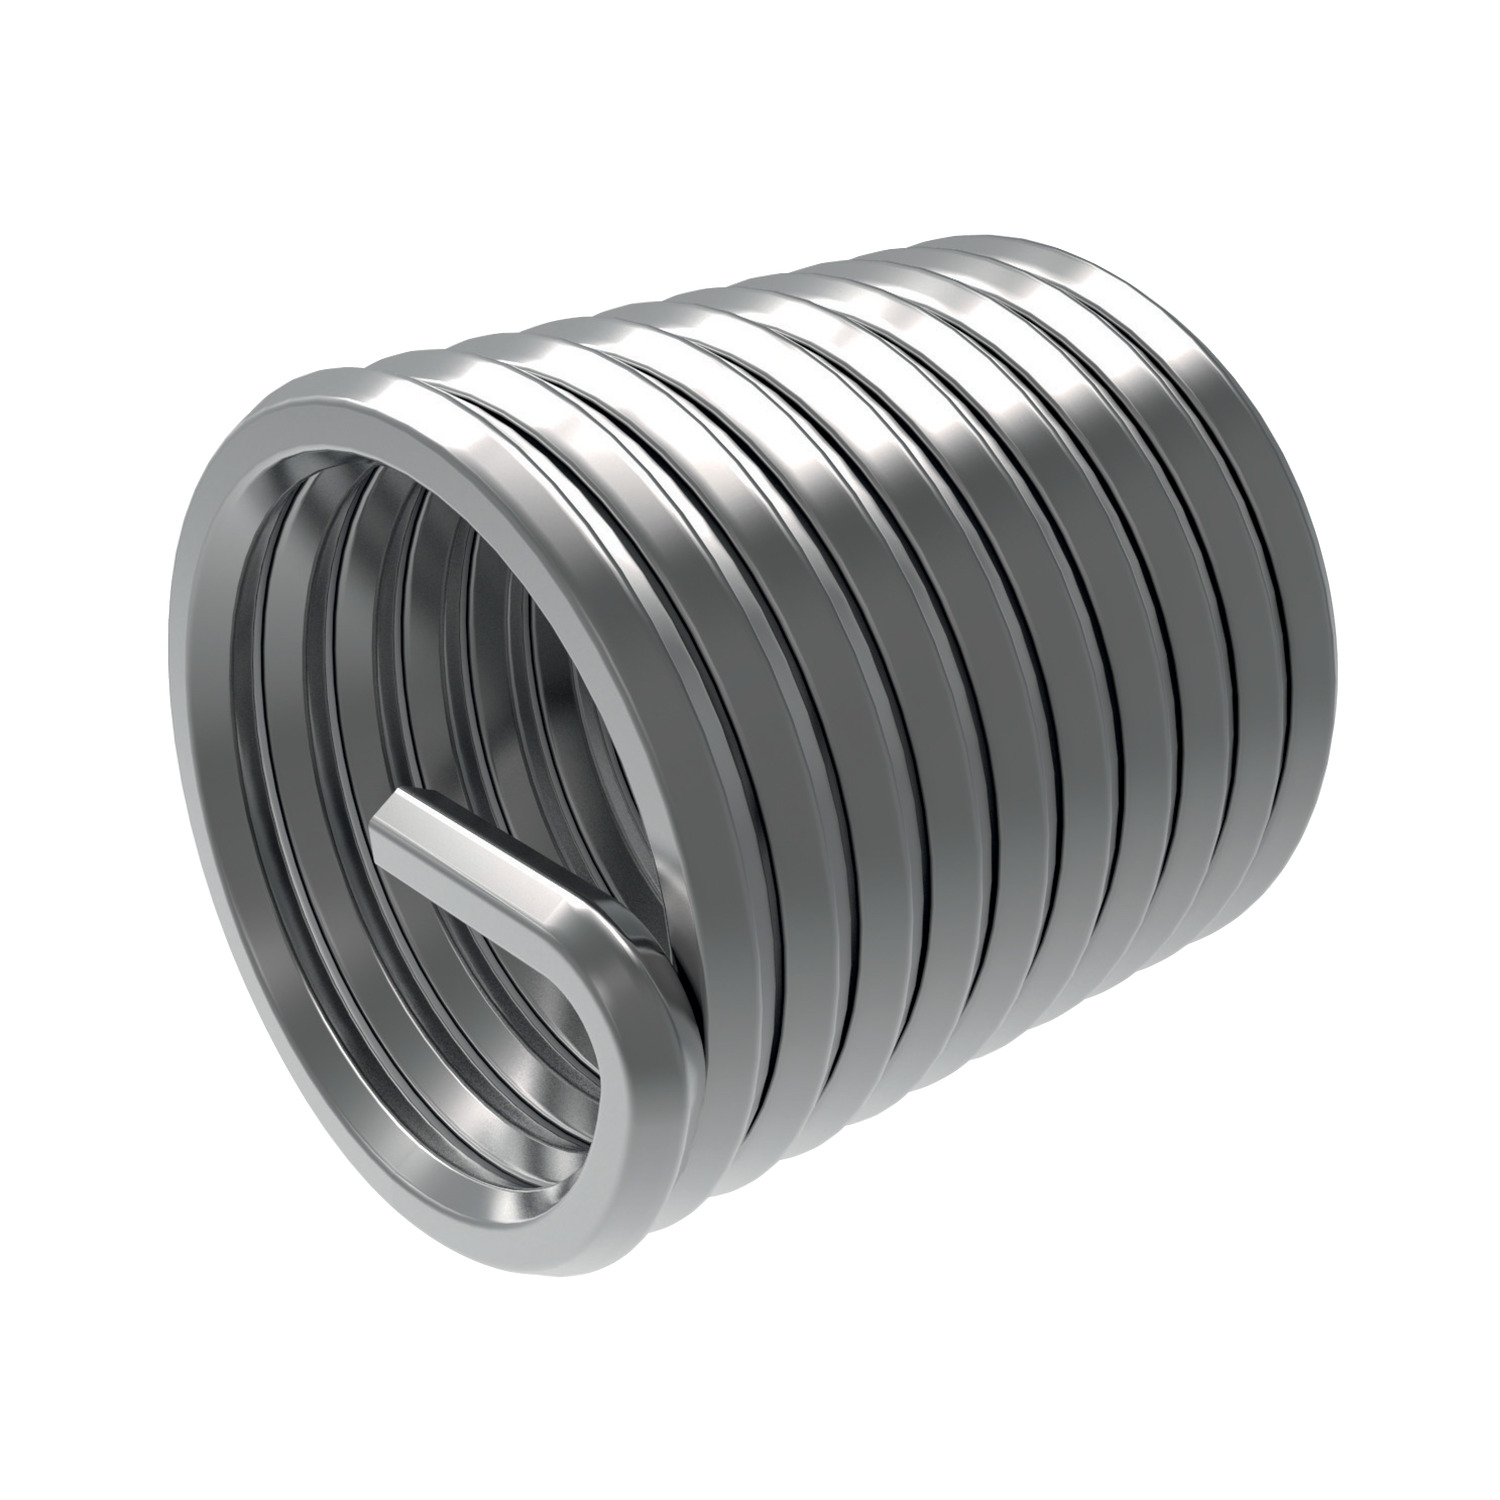 Wire Thread Inserts - Free Running A2 stainless steel threaded inserts with metric coarse threads. We are able to provide other threads on request